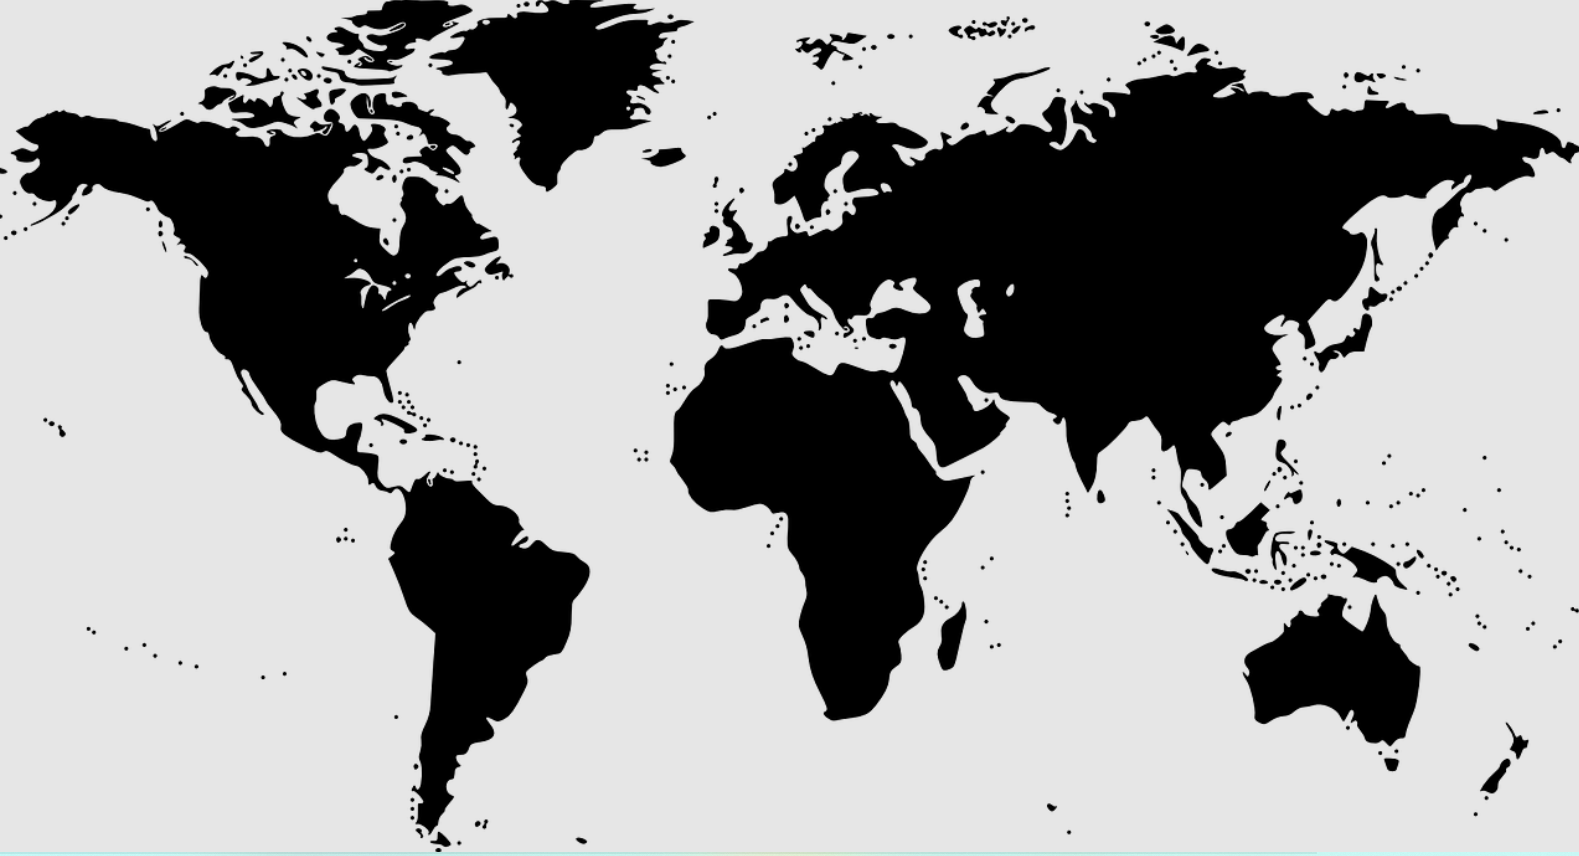 Map of World Black and White